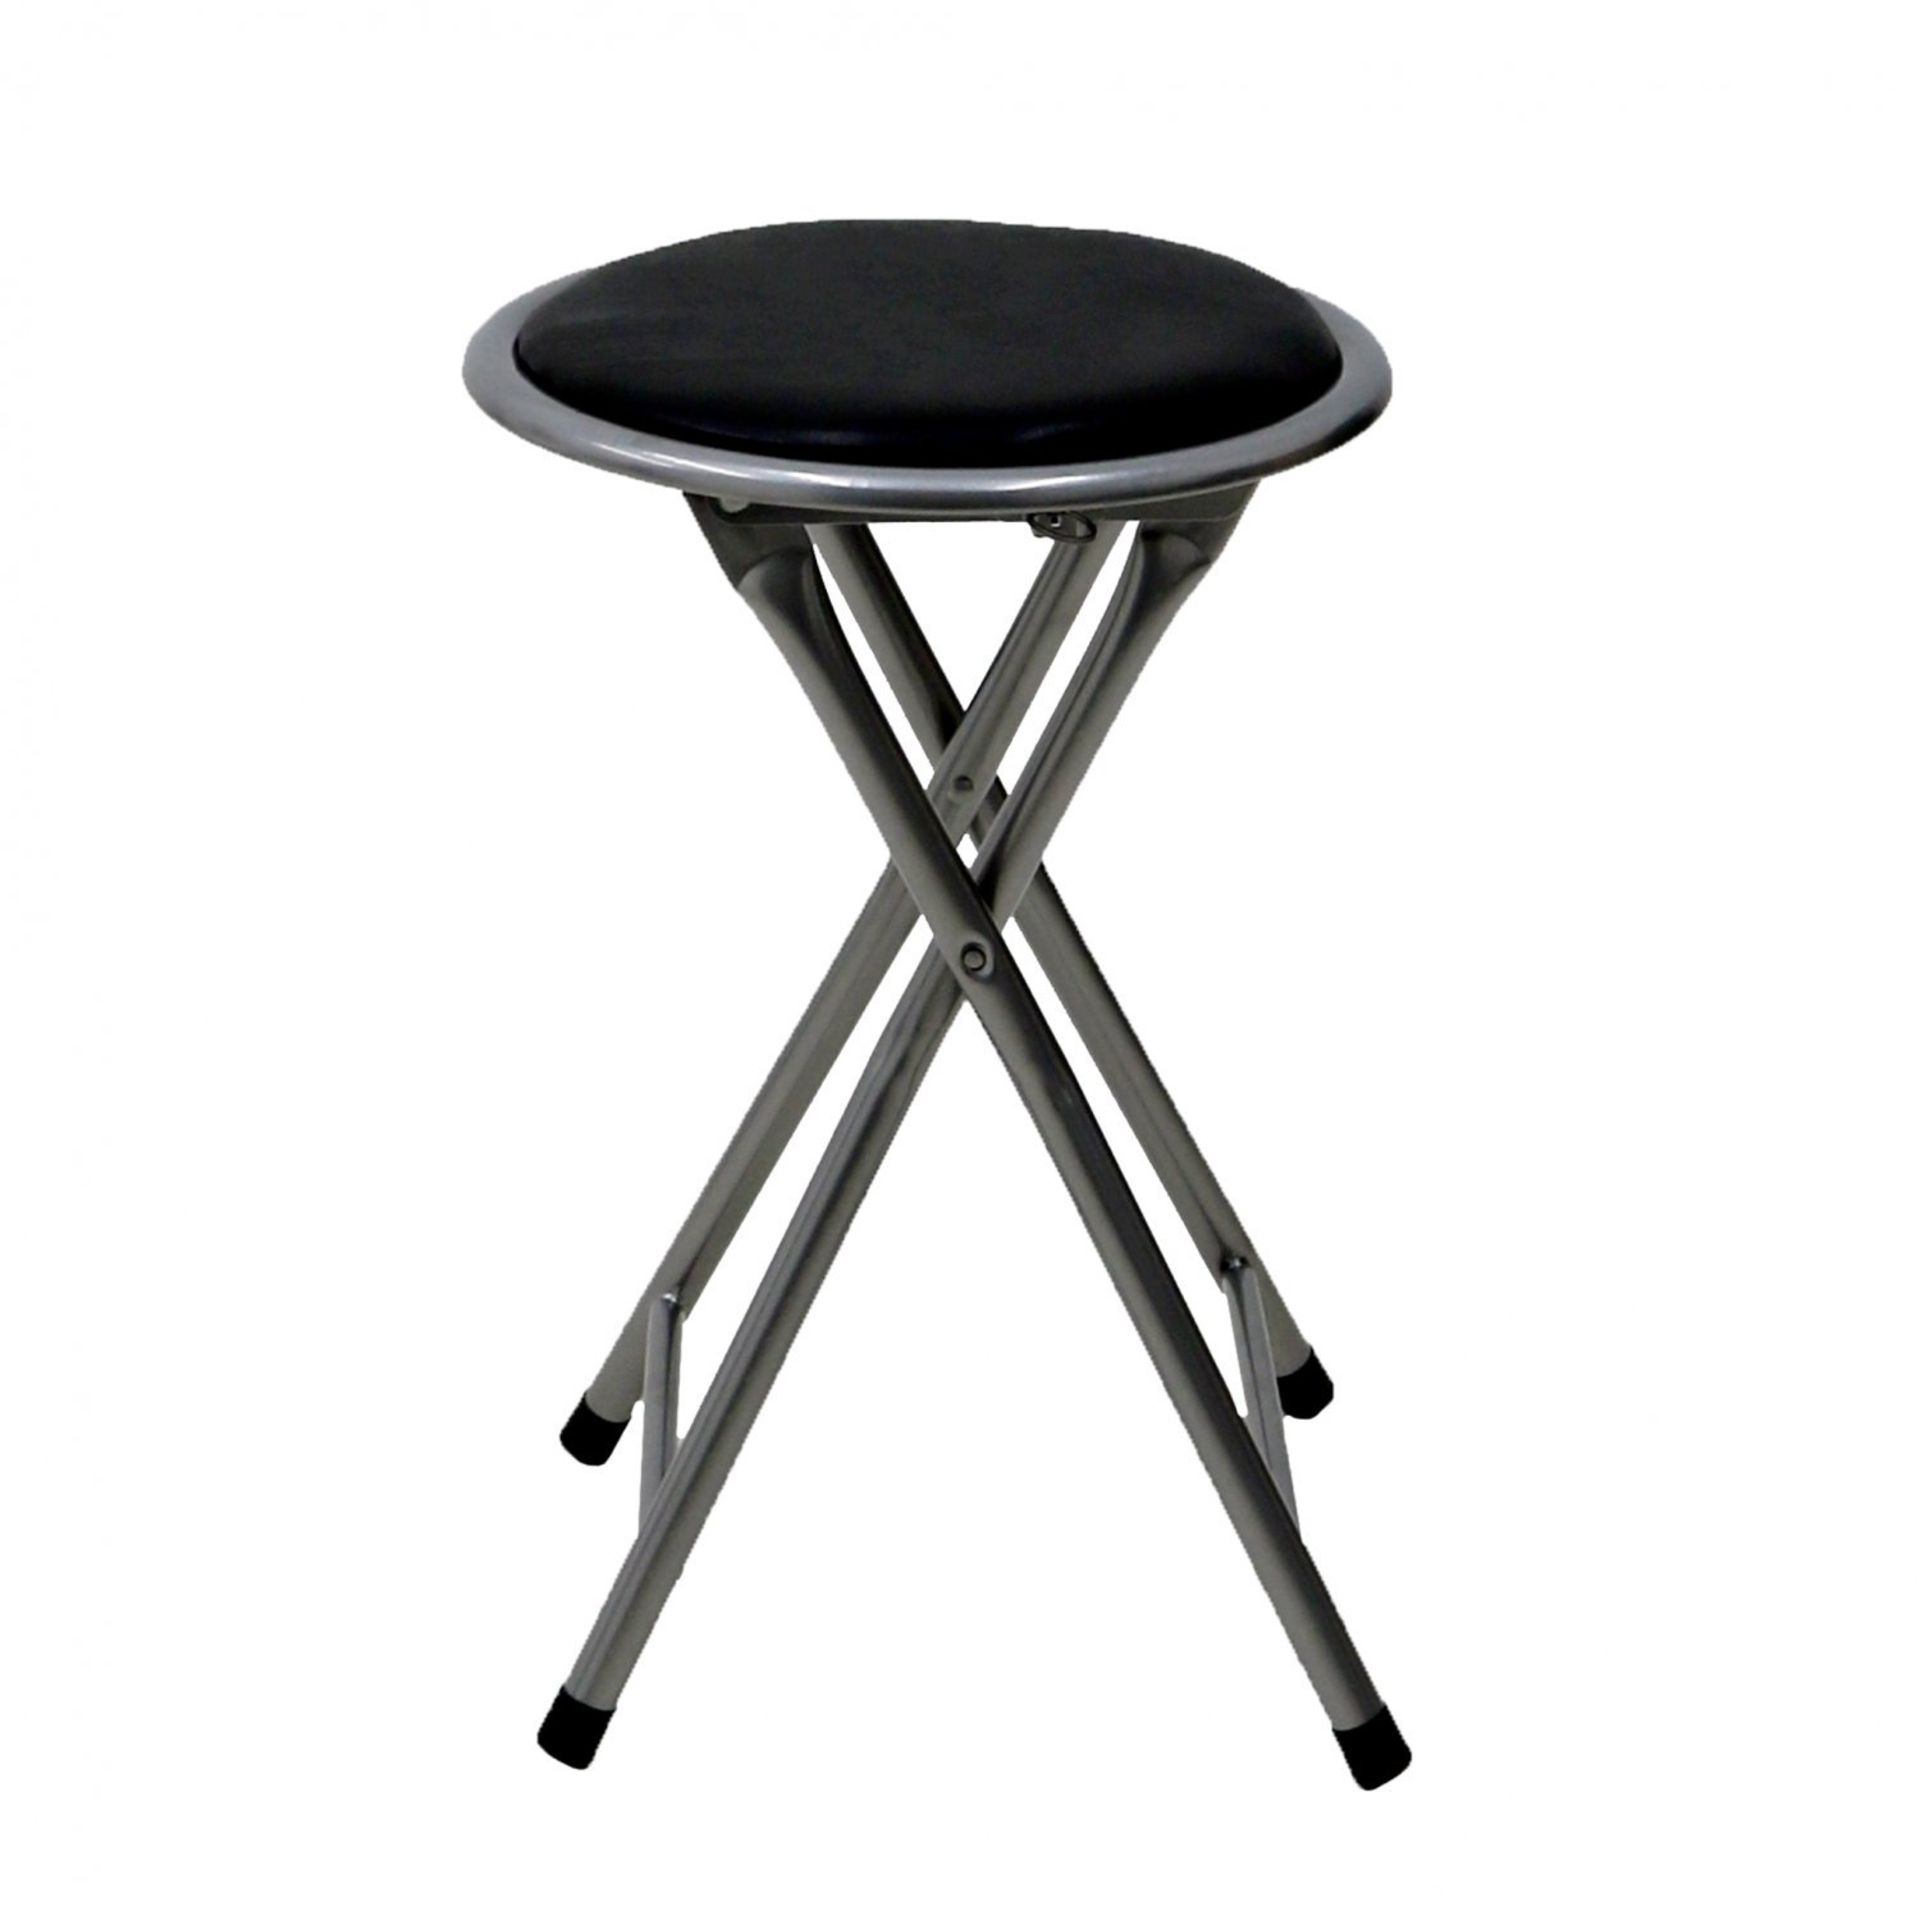 (RL78) Black Padded Folding Breakfast Kitchen Bar Stool Seat Perfect for sitting at your kit... - Image 2 of 2